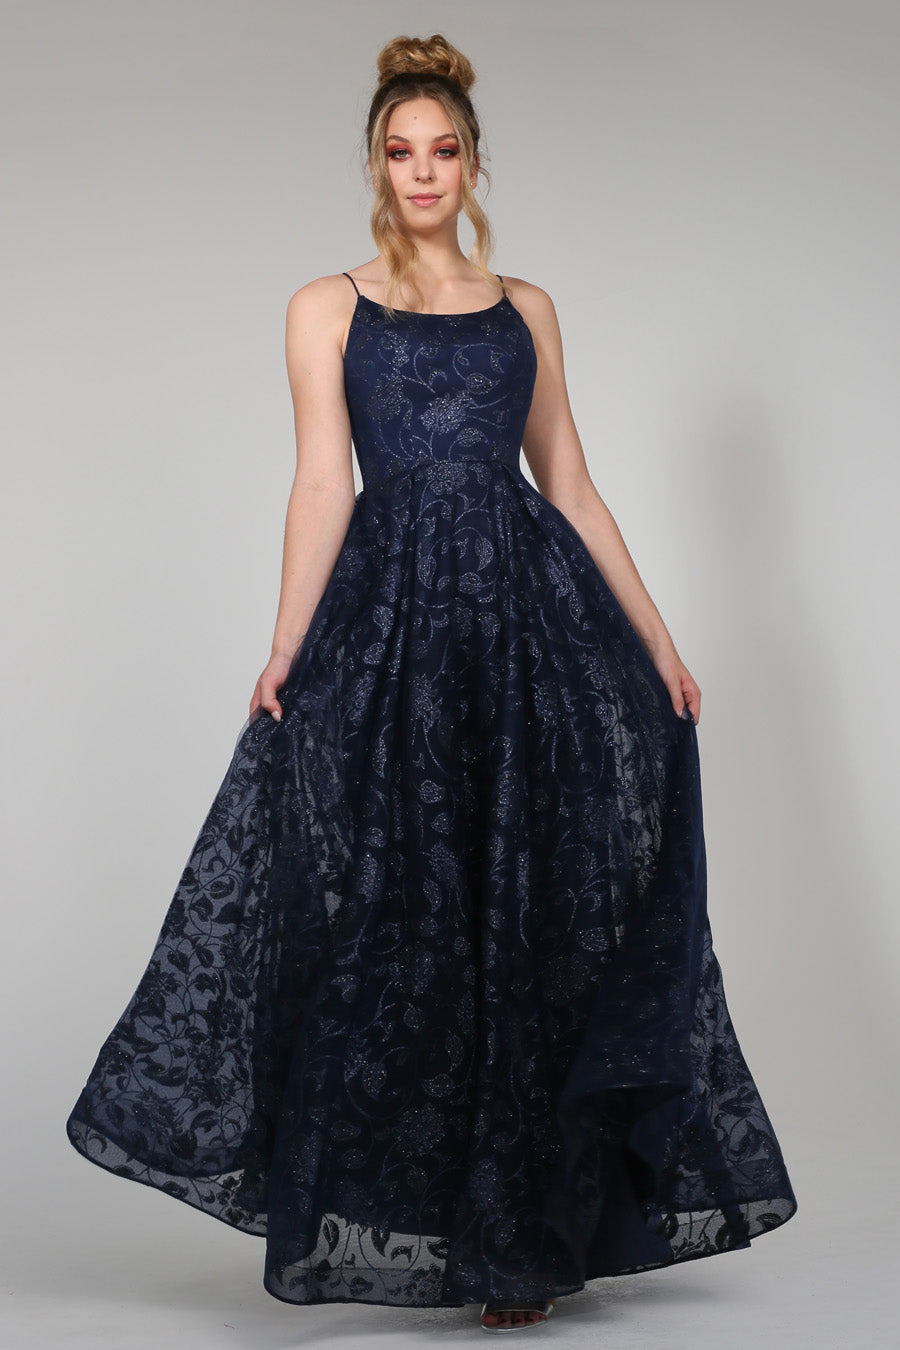 Tina Holly Couture Designer TH018 Blue Floral Ball Gown Formal Dress {vendor} AfterPay Humm ZipPay LayBuy Sezzle